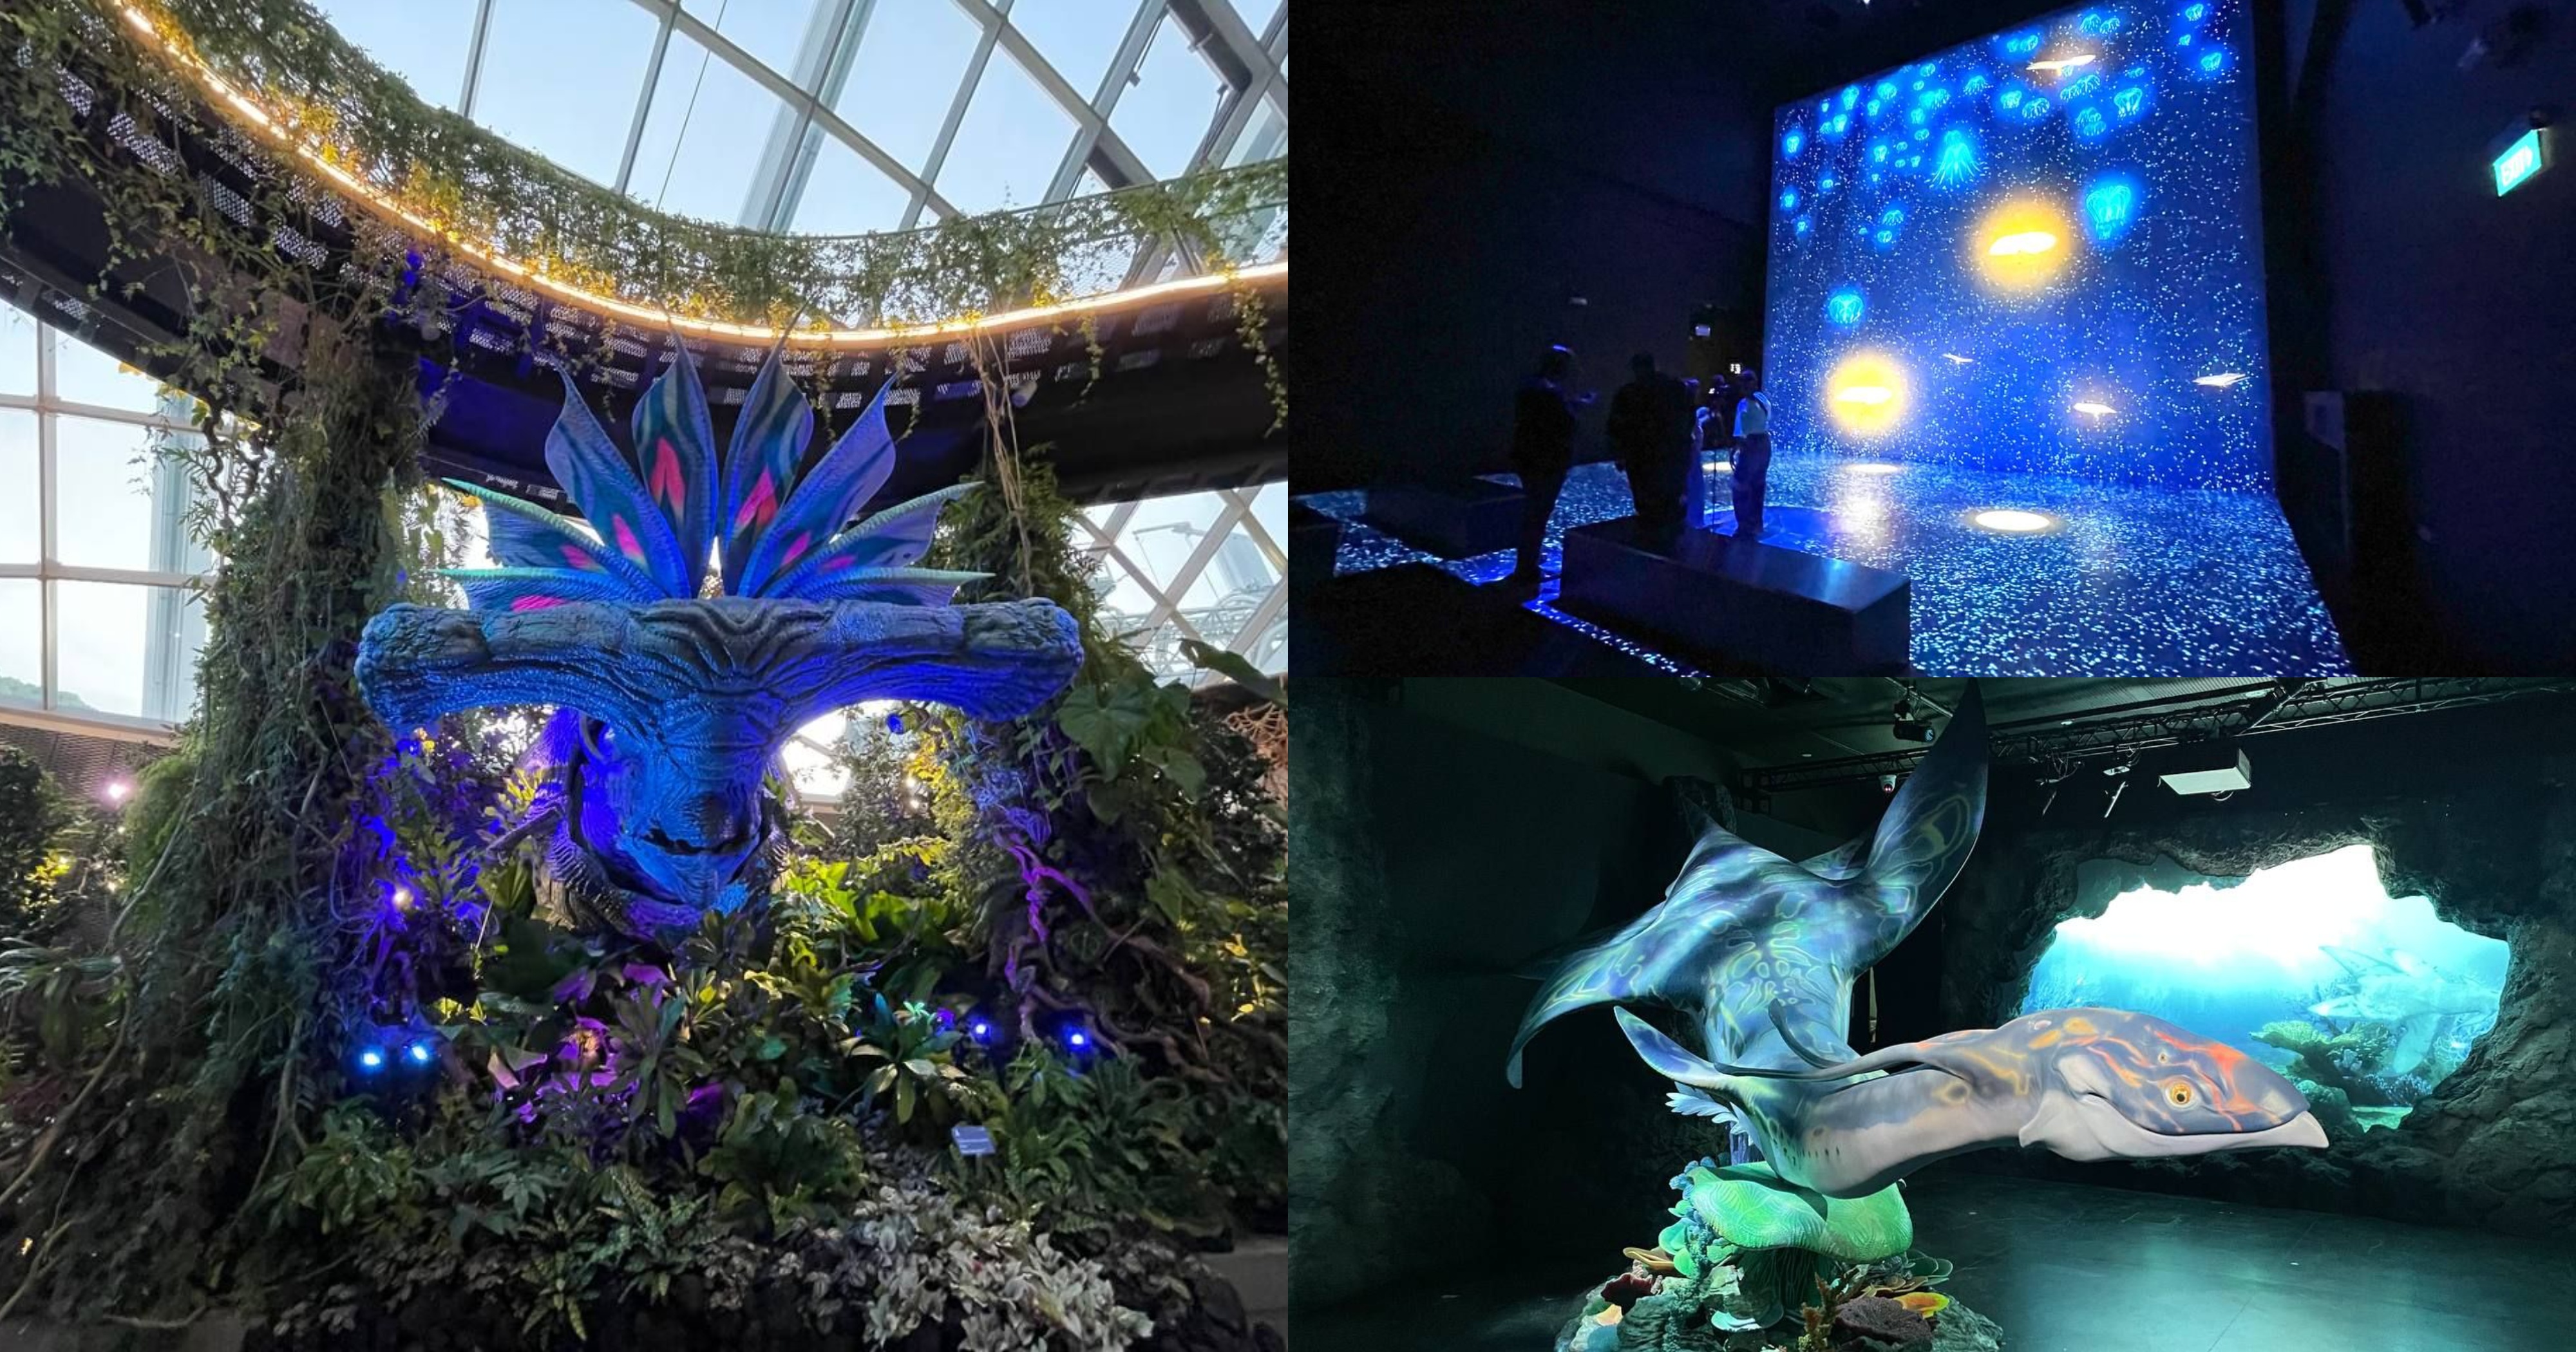 Gardens by the Bay transforms into Avatar planet Pandora with day  night  walkthrough experience  MothershipSG  News from Singapore Asia and  around the world